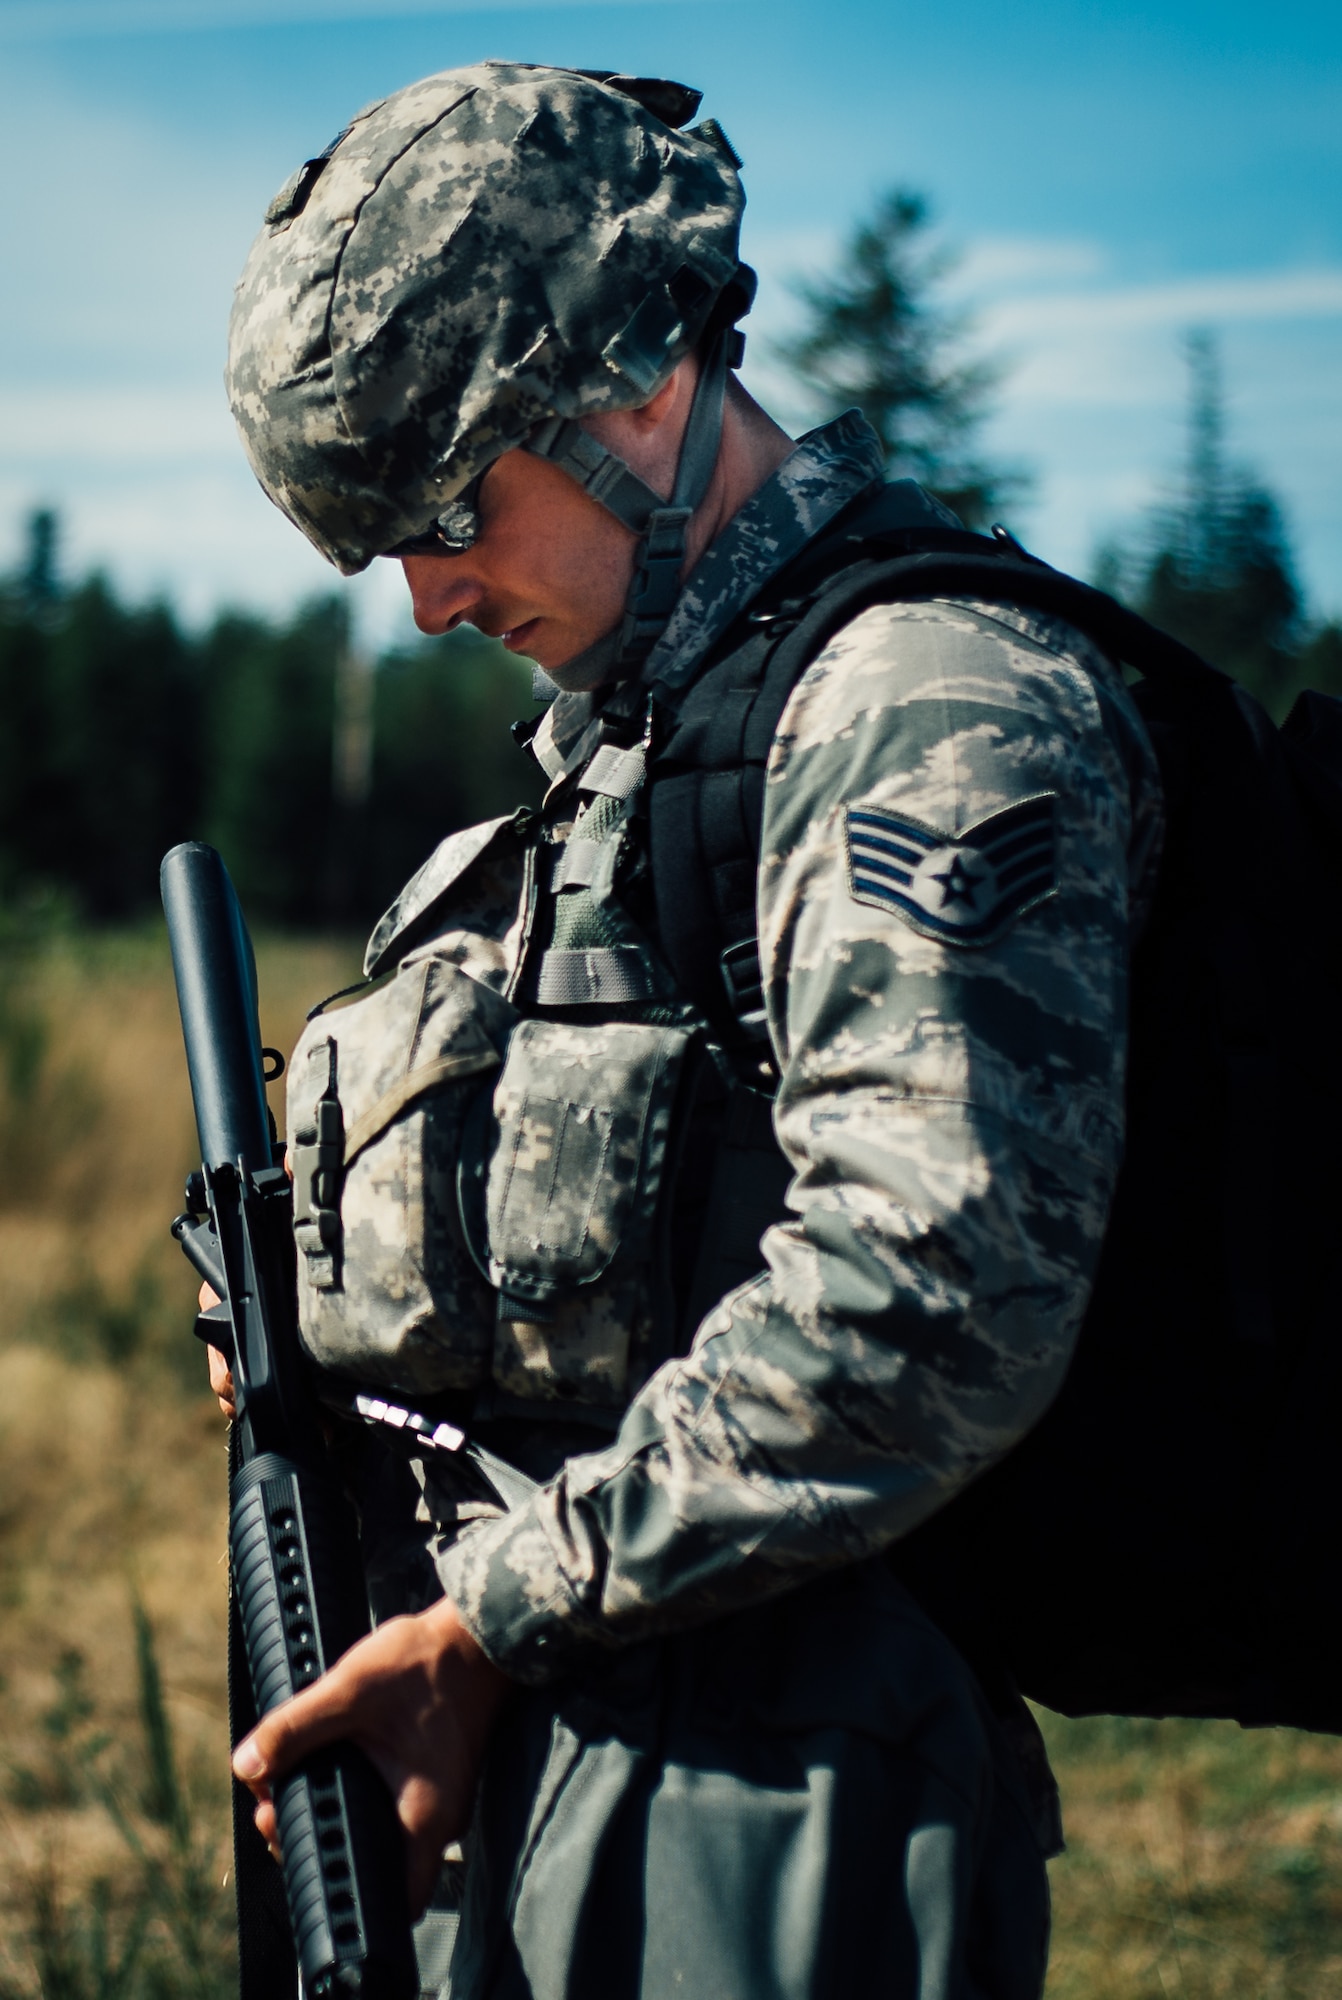 Staff Sgt. Kyle Bosshart, 446th Aeromedical Staging Squadron Expert Field Medic Badge candidate, waits to begin testing during the EFMB course at Joint Base Lewis-McChord, Wash., Sept. 24, 2015. In June 1965, the U.S. Army expanded its awards program by implementing the EFMB for combat medics who do not see battle. (U.S. Air Force photo by Senior Airman Jordan Castelan/Released)